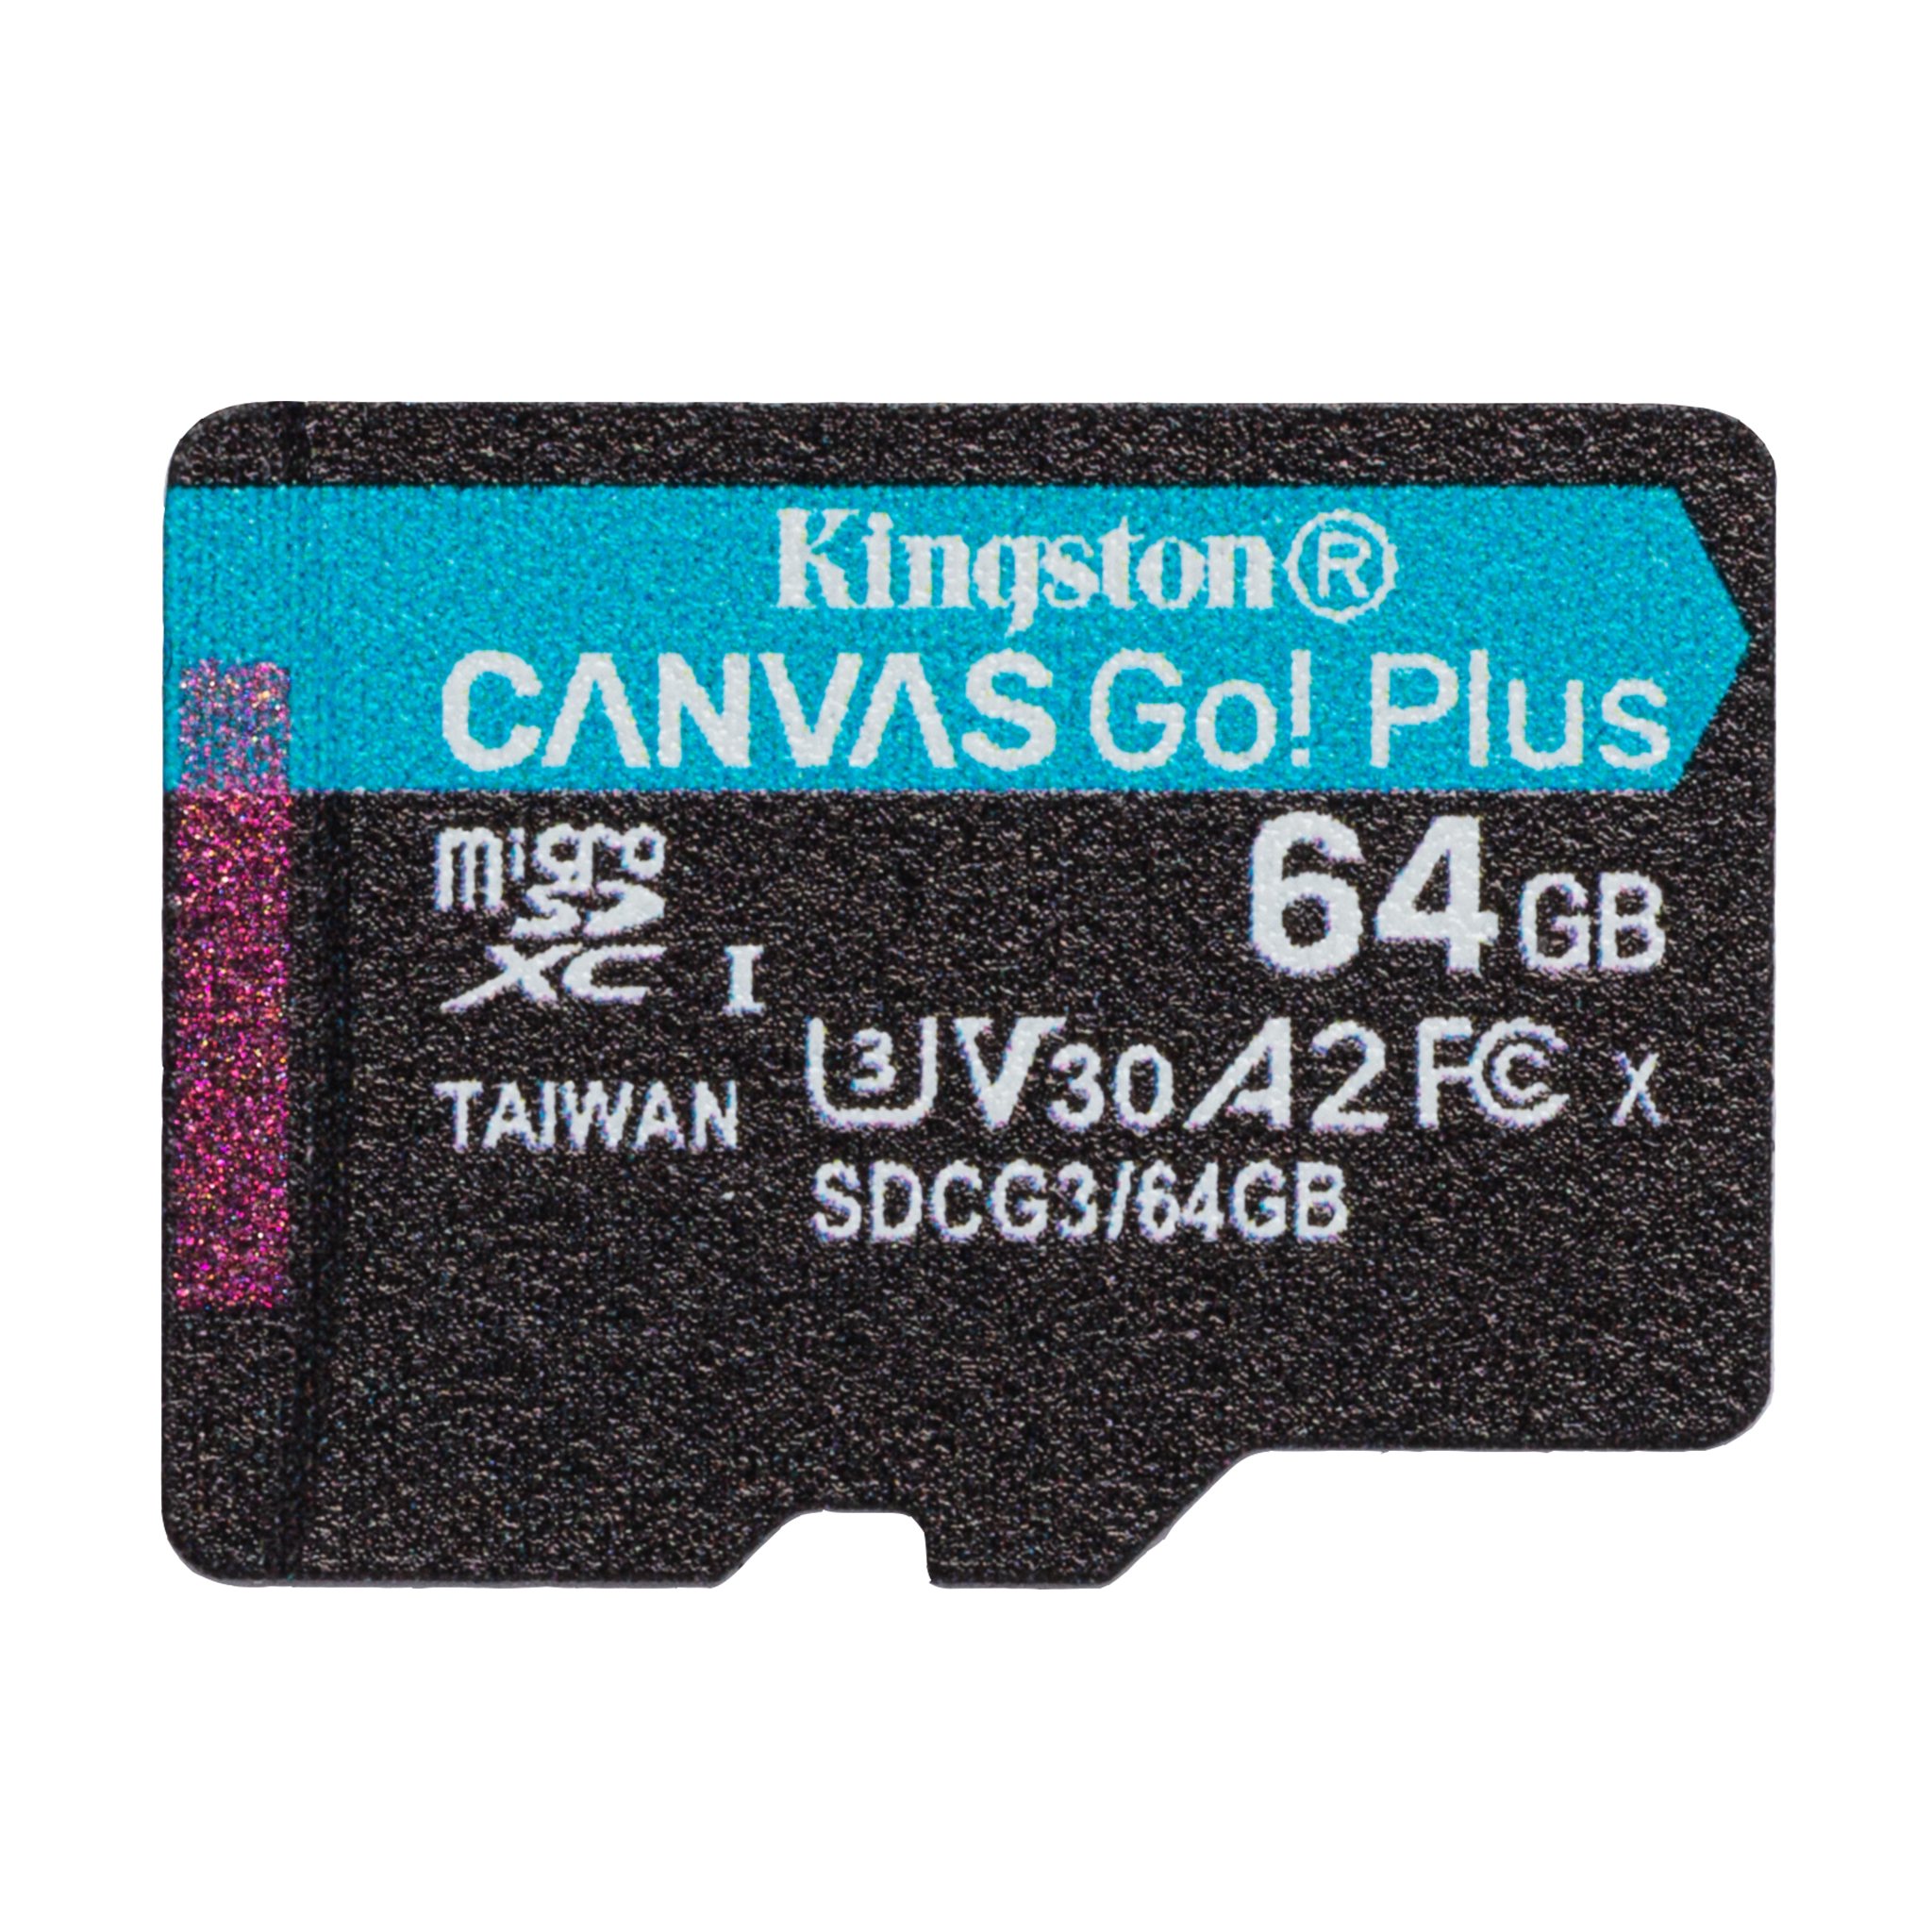 100MBs Works with Kingston Kingston 64GB Samsung W720NZKB MicroSDXC Canvas Select Plus Card Verified by SanFlash.